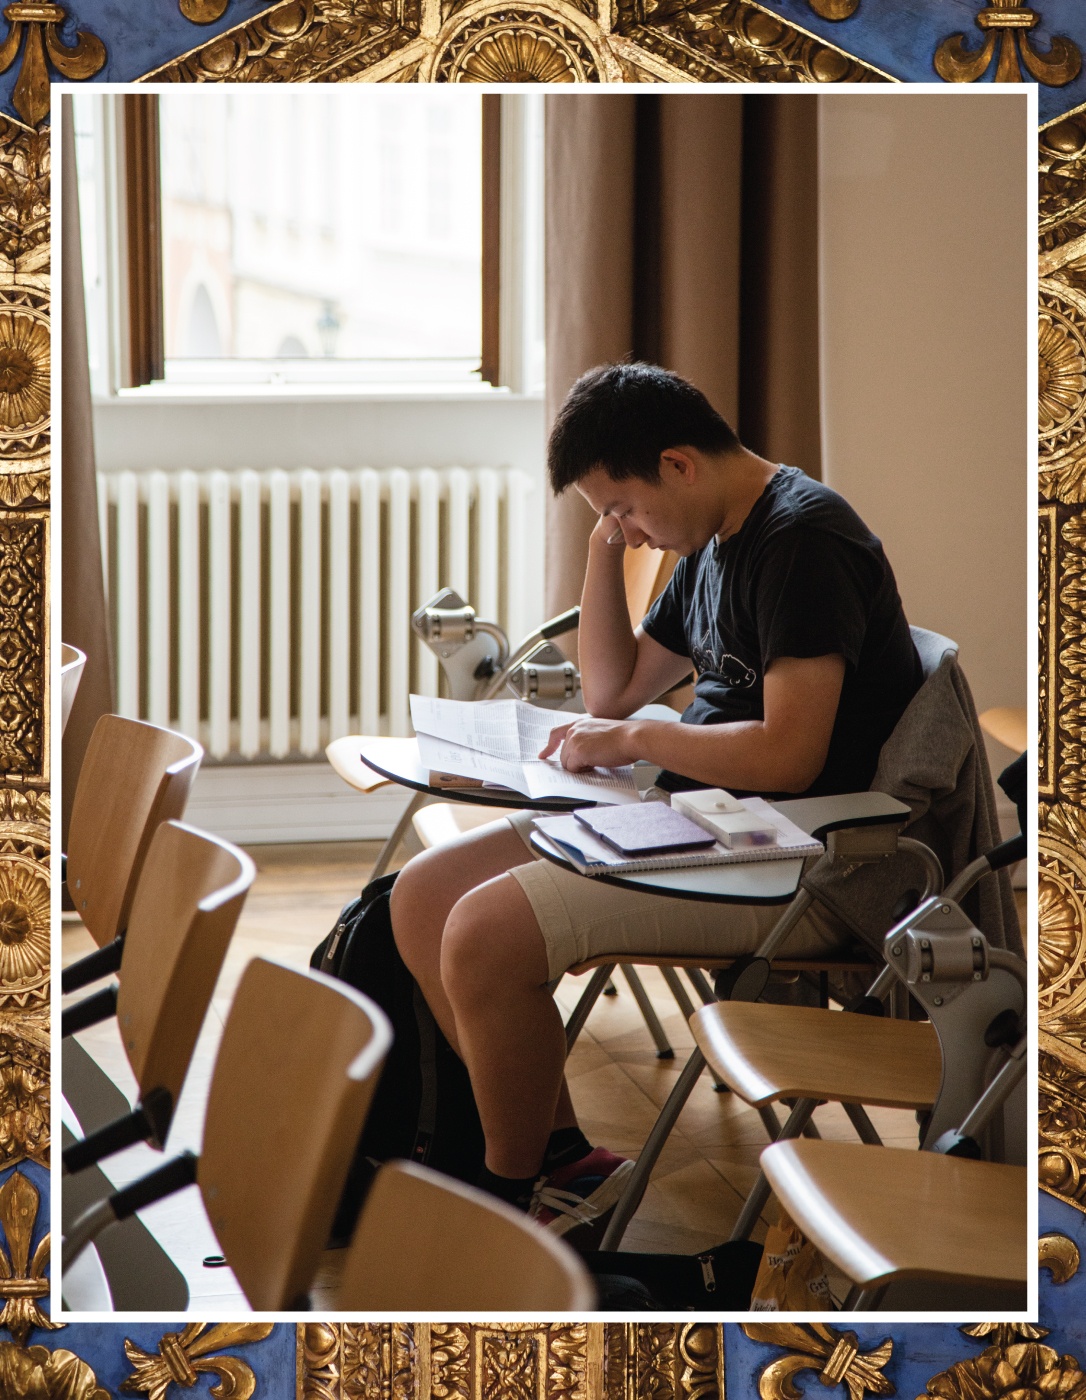 A student studying at a desk.